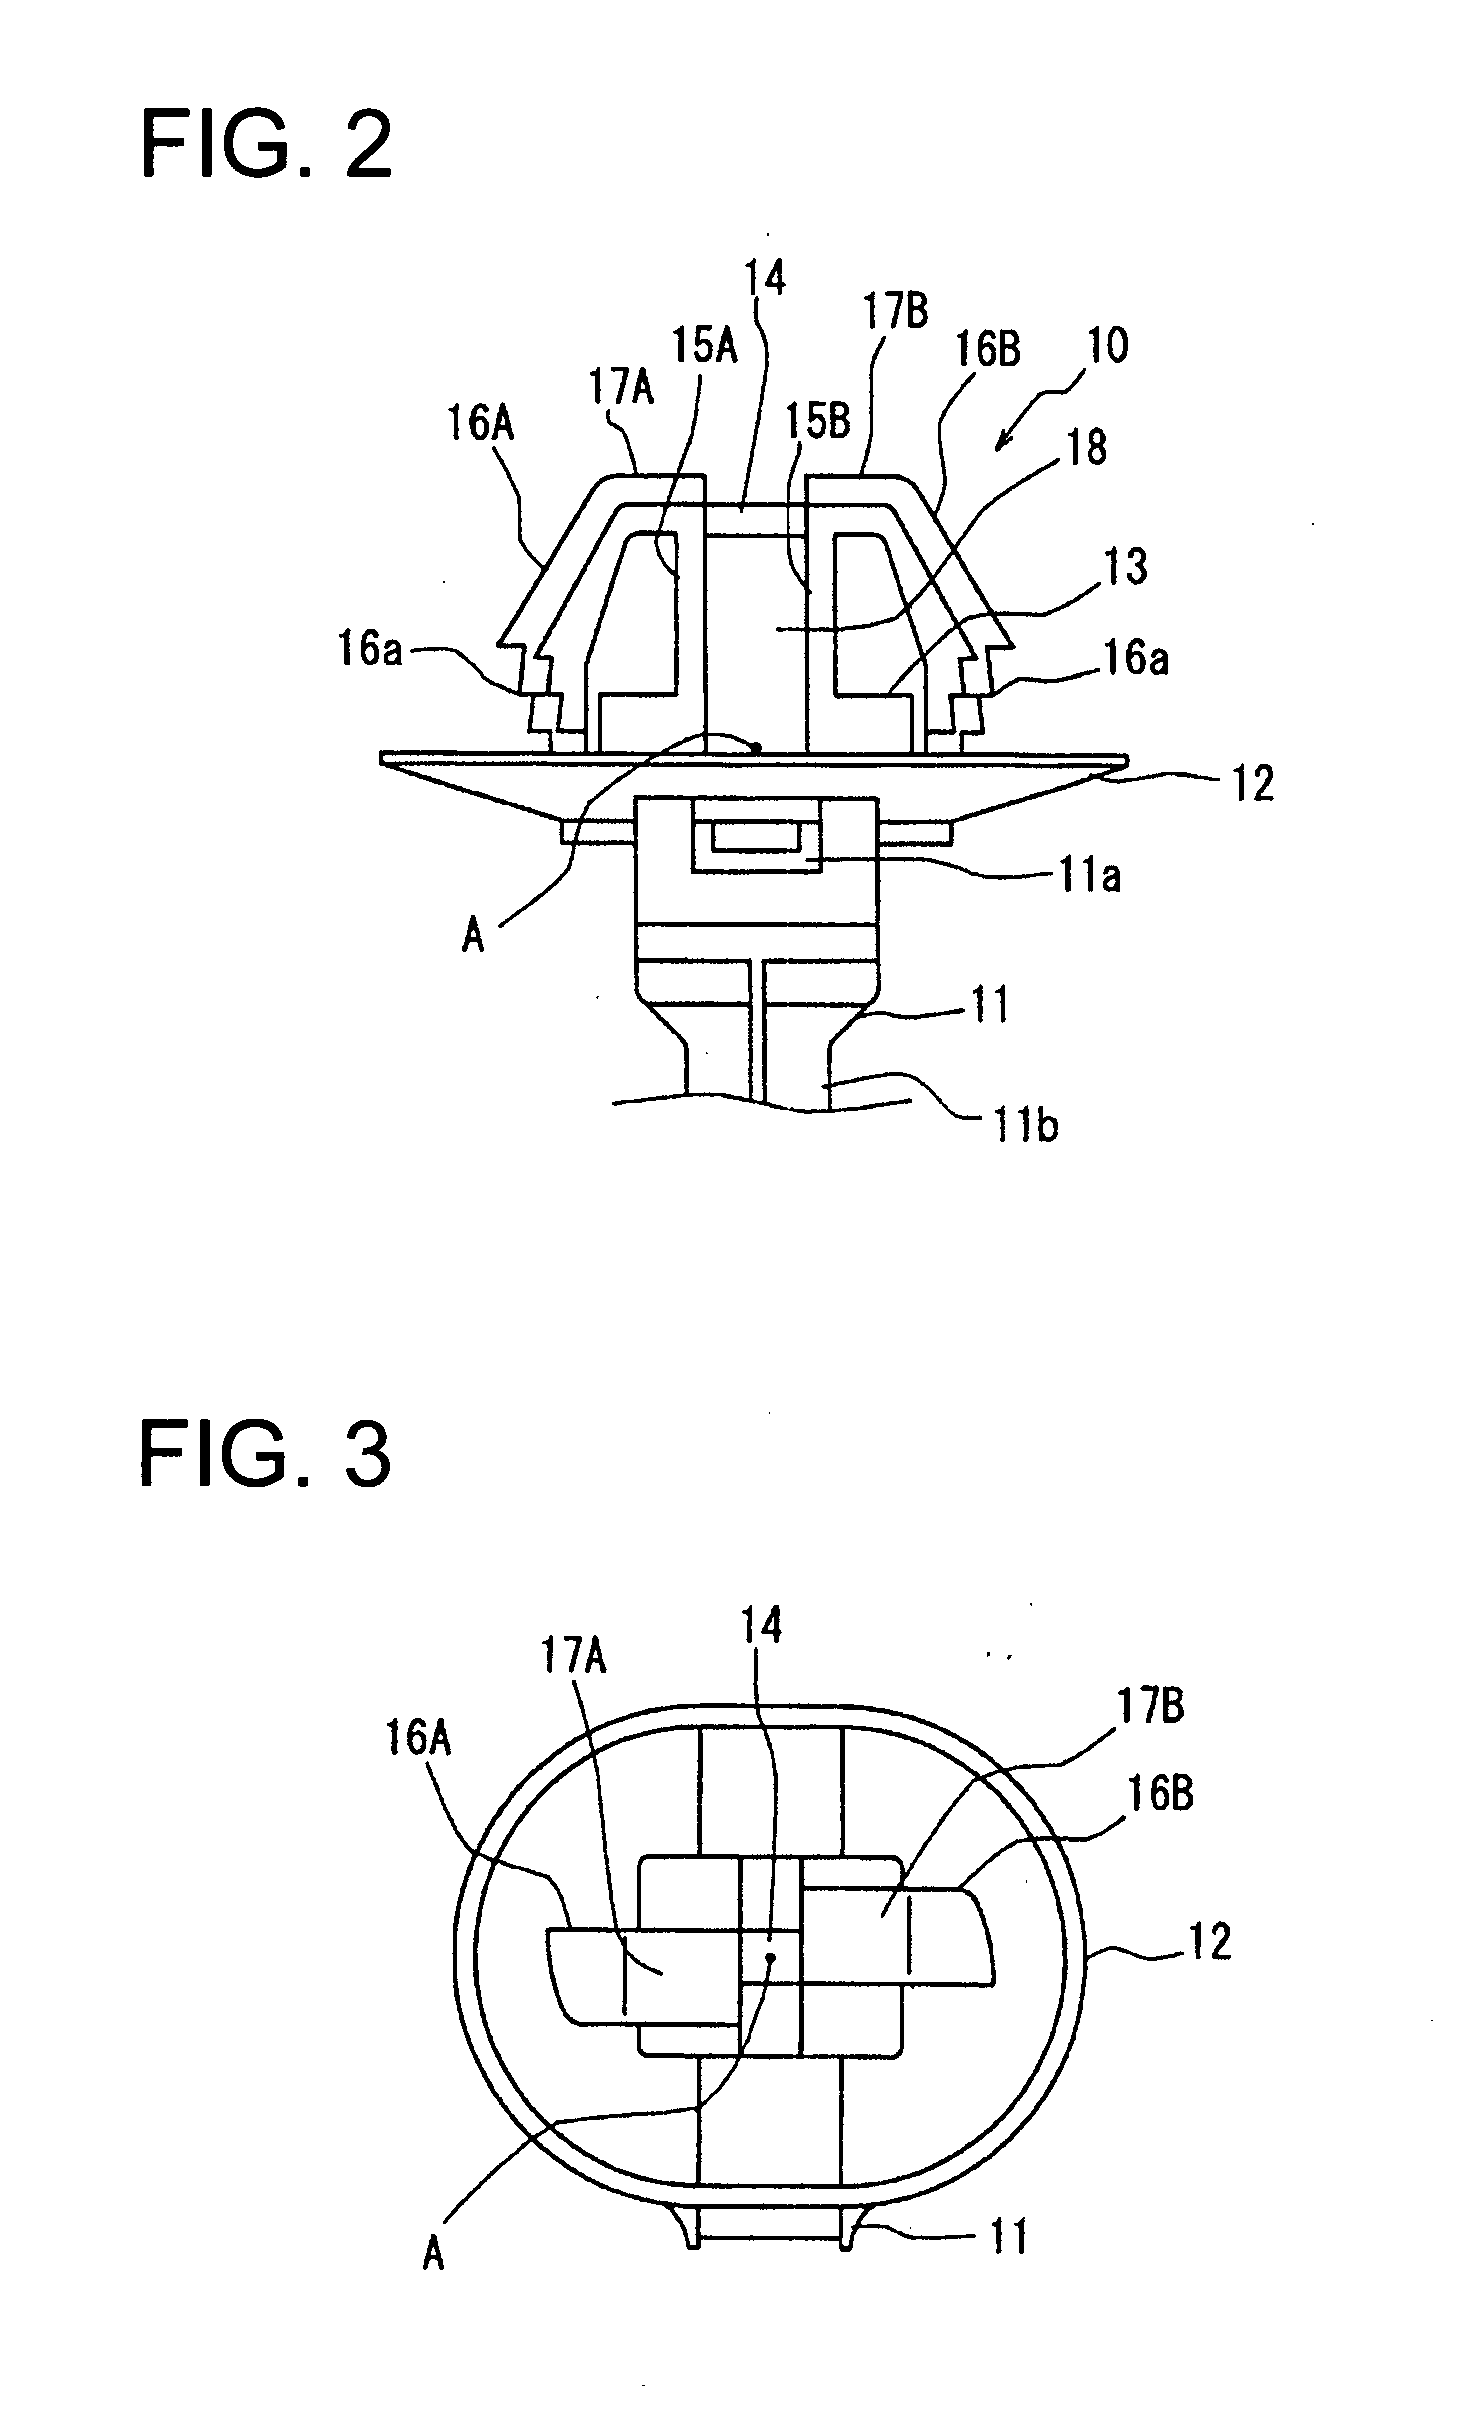 Clamp for use in wire harness